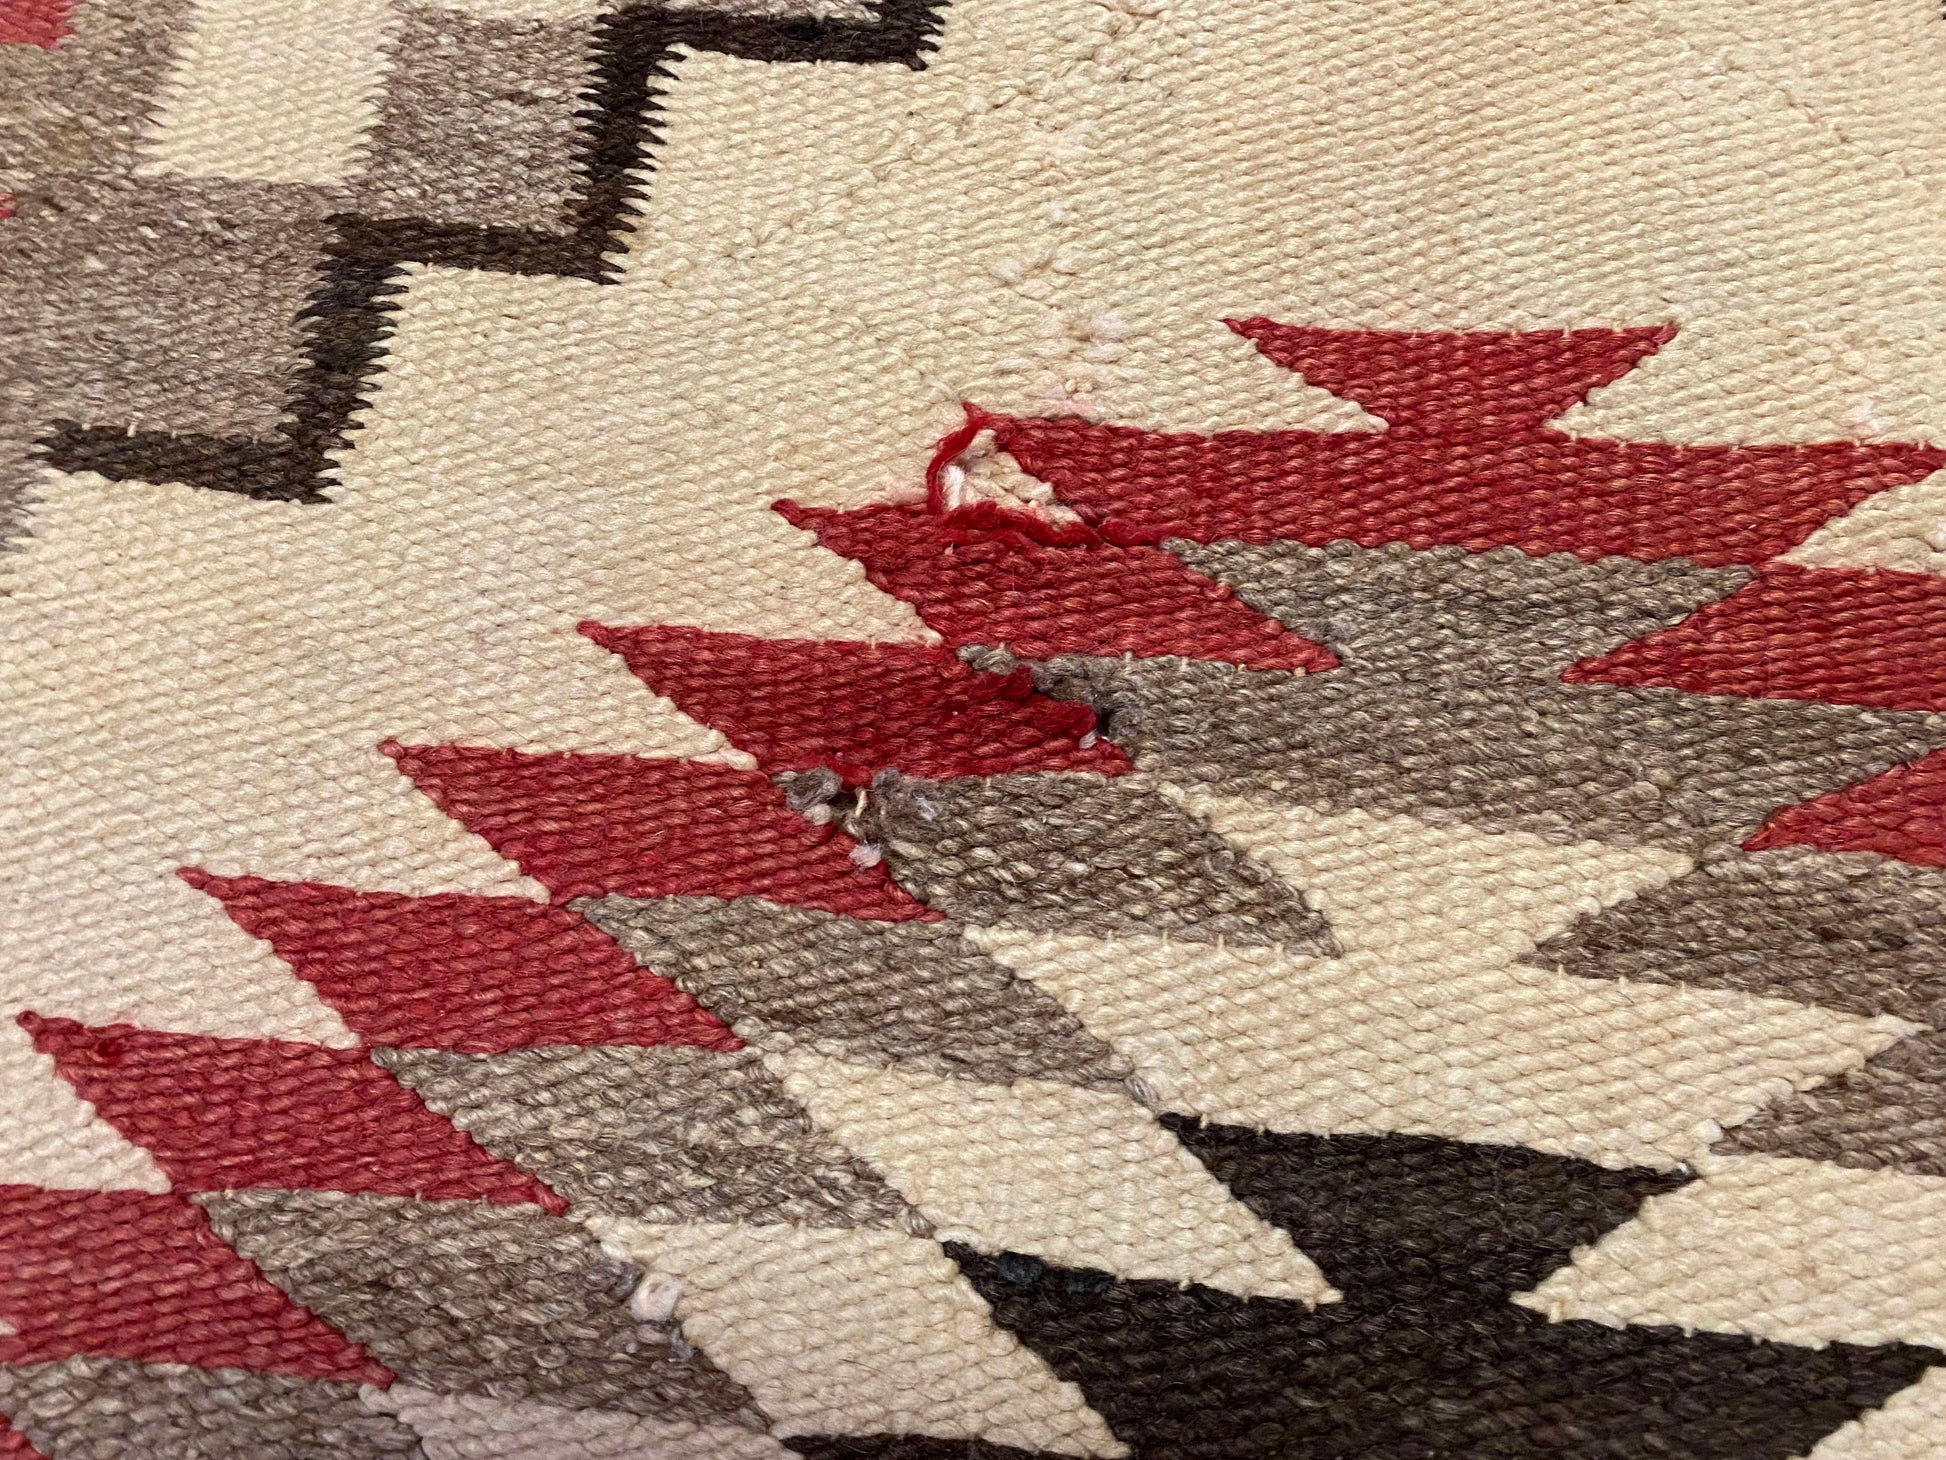 Antique Navajo rug with cream base, tan and red whirling logs and zig zag shapes, naturally dyed and hand woven - Available from King Kennedy Rugs Los Angeles